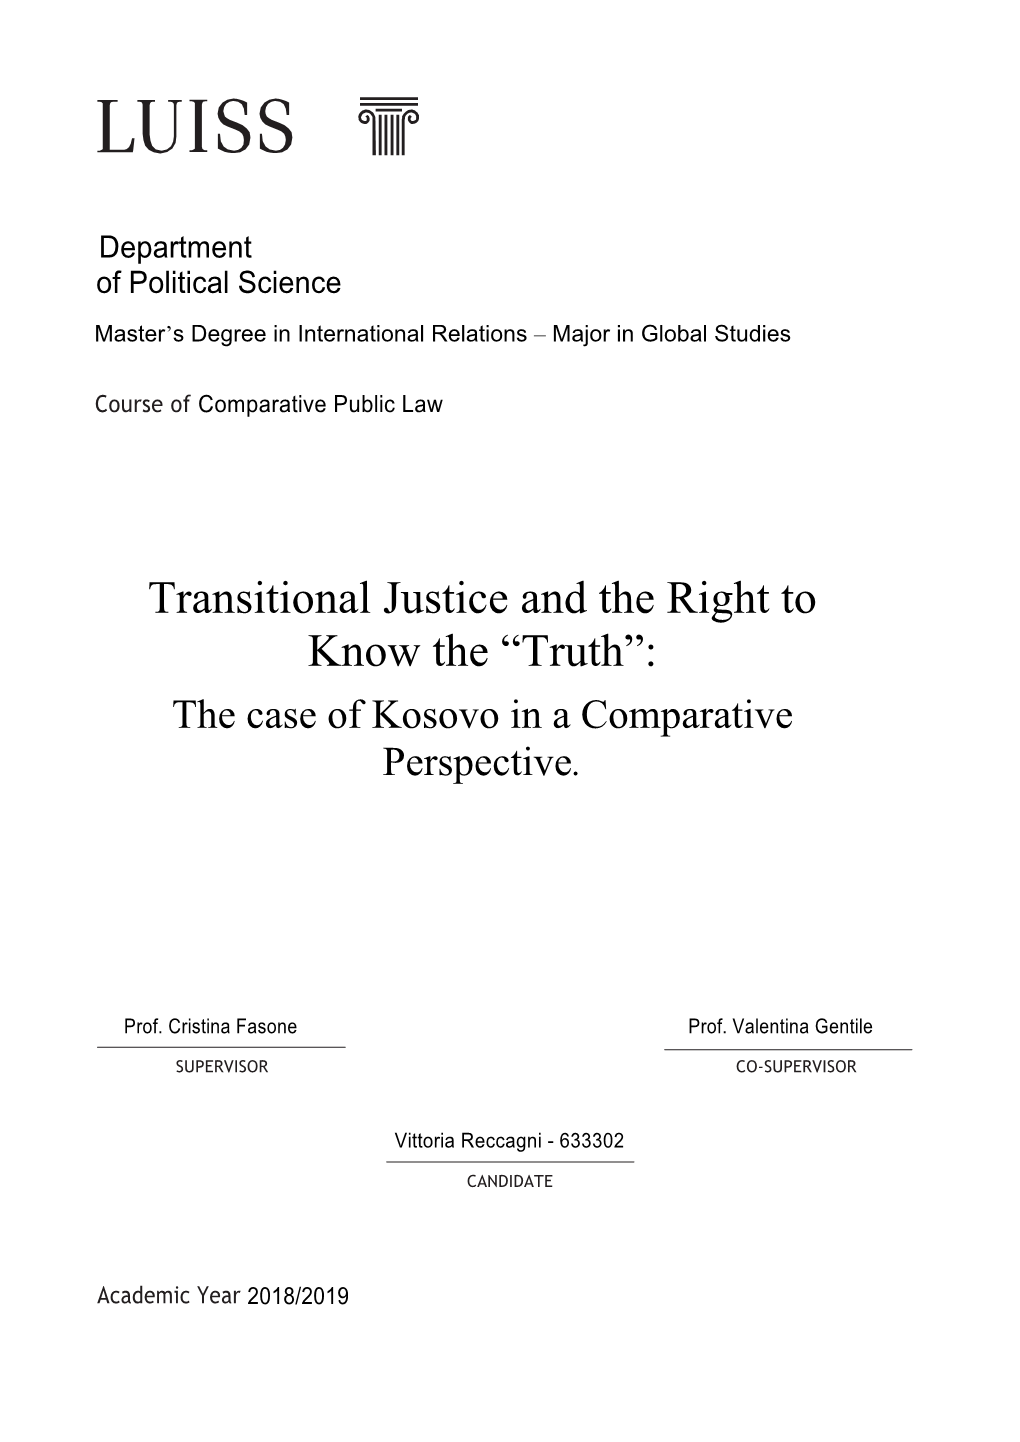 Transitional Justice and the Right to Know the “Truth”: the Case of Kosovo in a Comparative Perspective